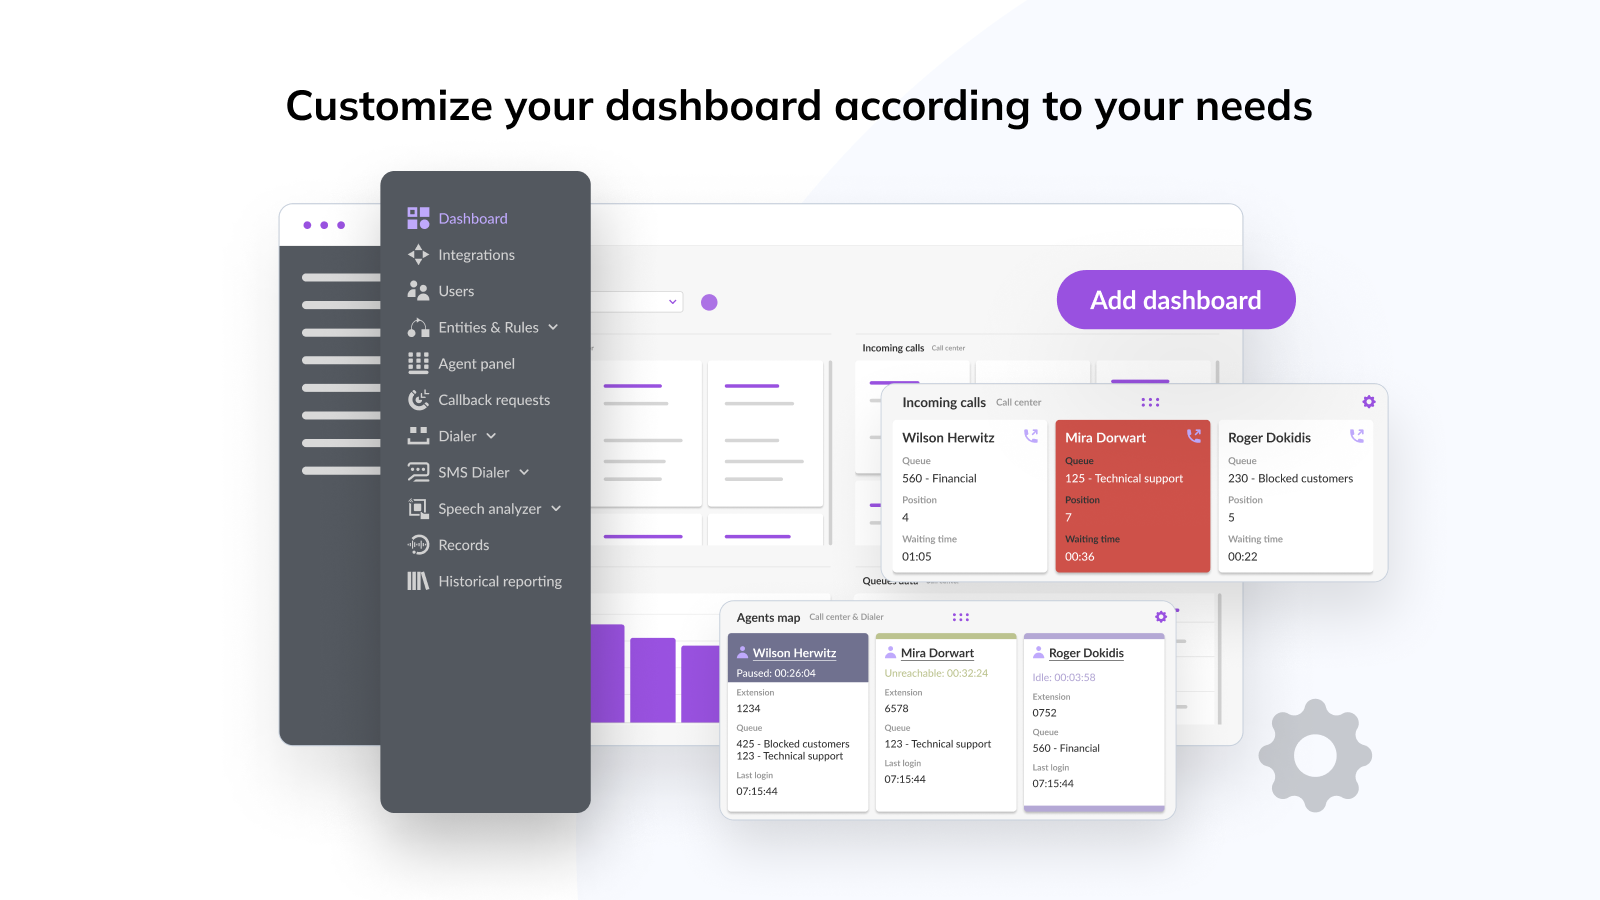 Customize your dashboard according to your needs